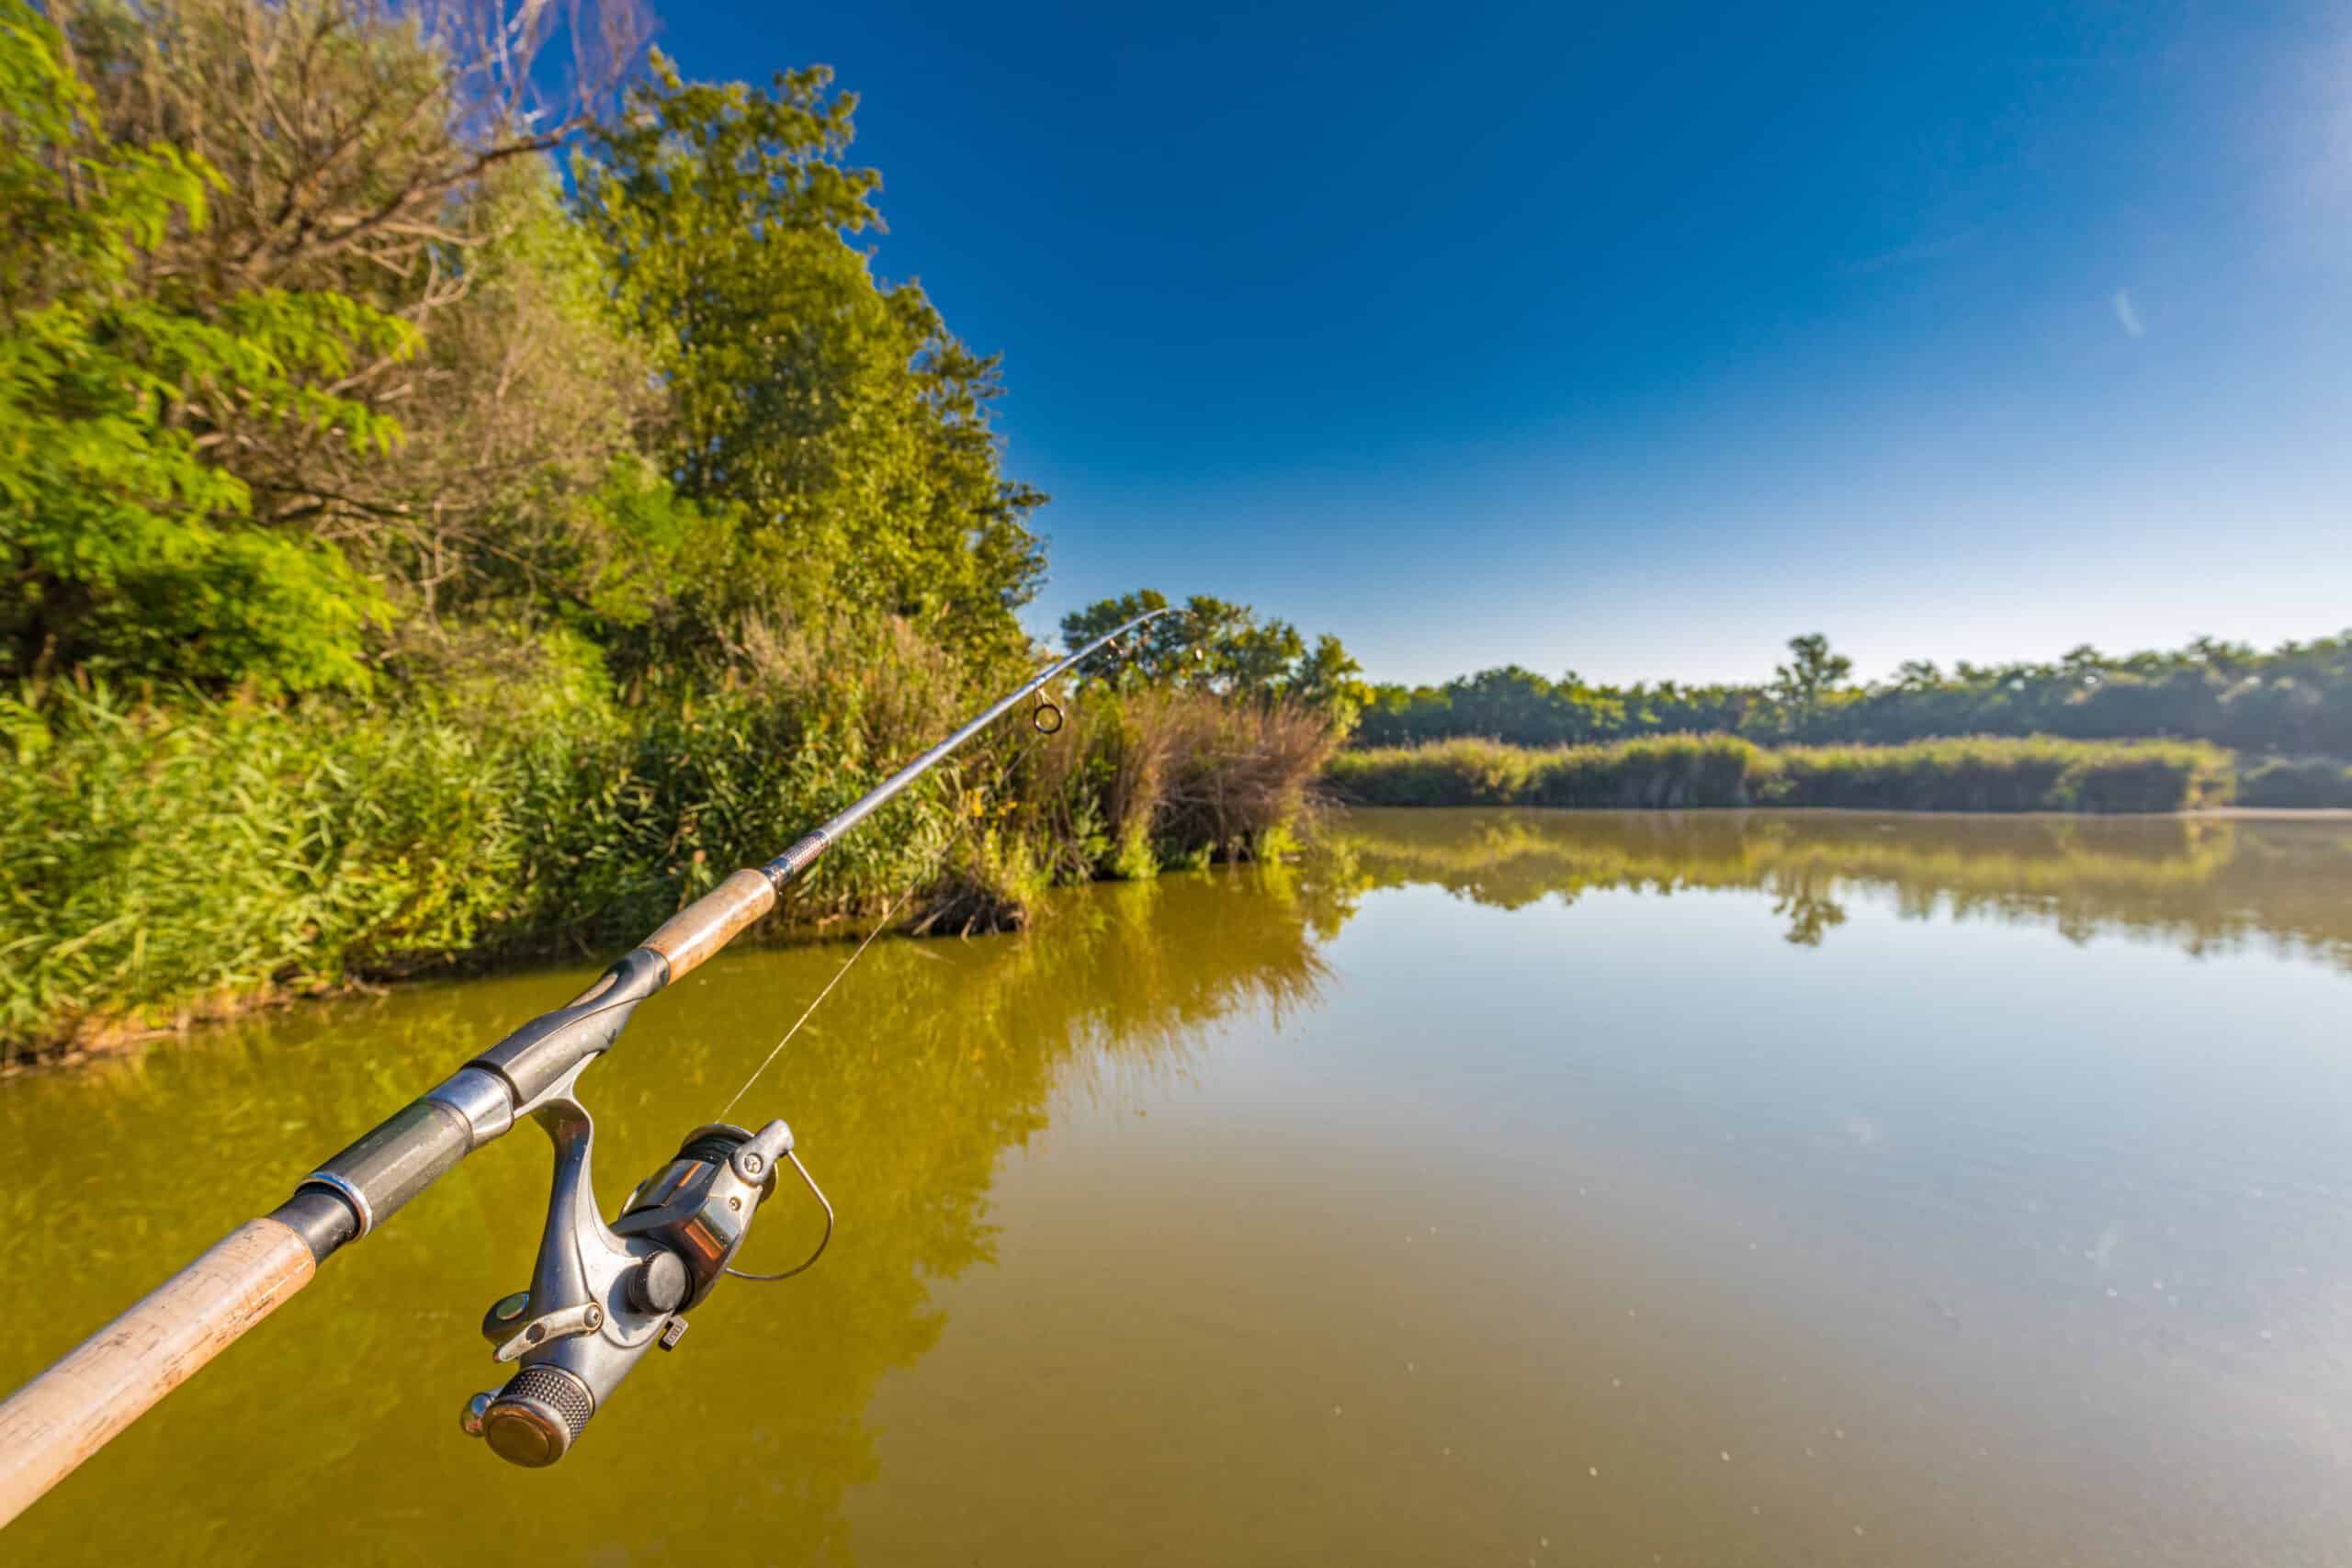 fanatic4fishing.com : What bait is illegal for fishing in Texas?